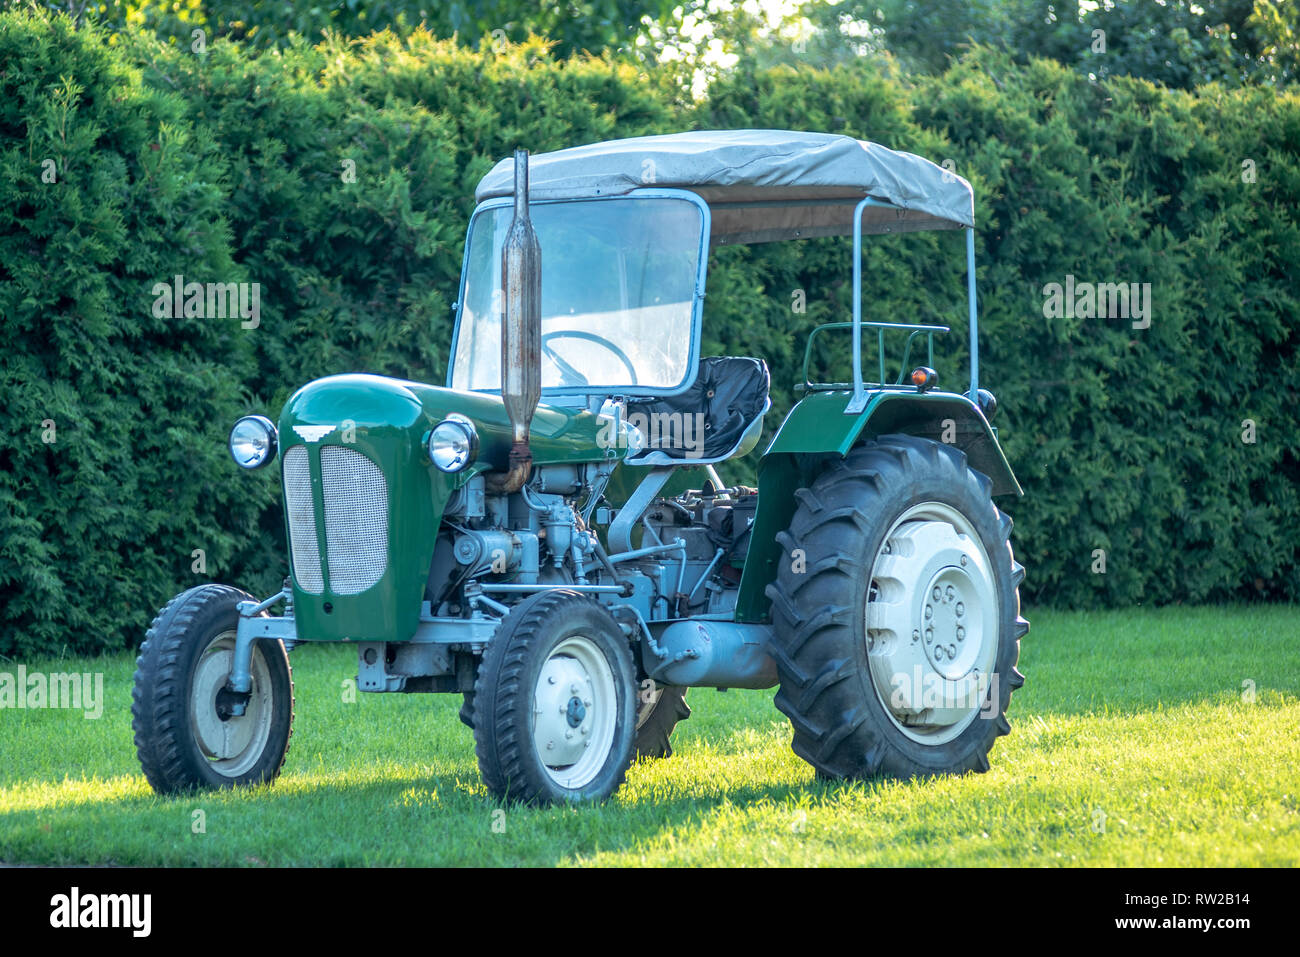 A green Polish manufactured tractor parked on the grass with green bushes behind. Broniewo, Kuyavian-Pomeranian Voivodeship, Poland Stock Photo